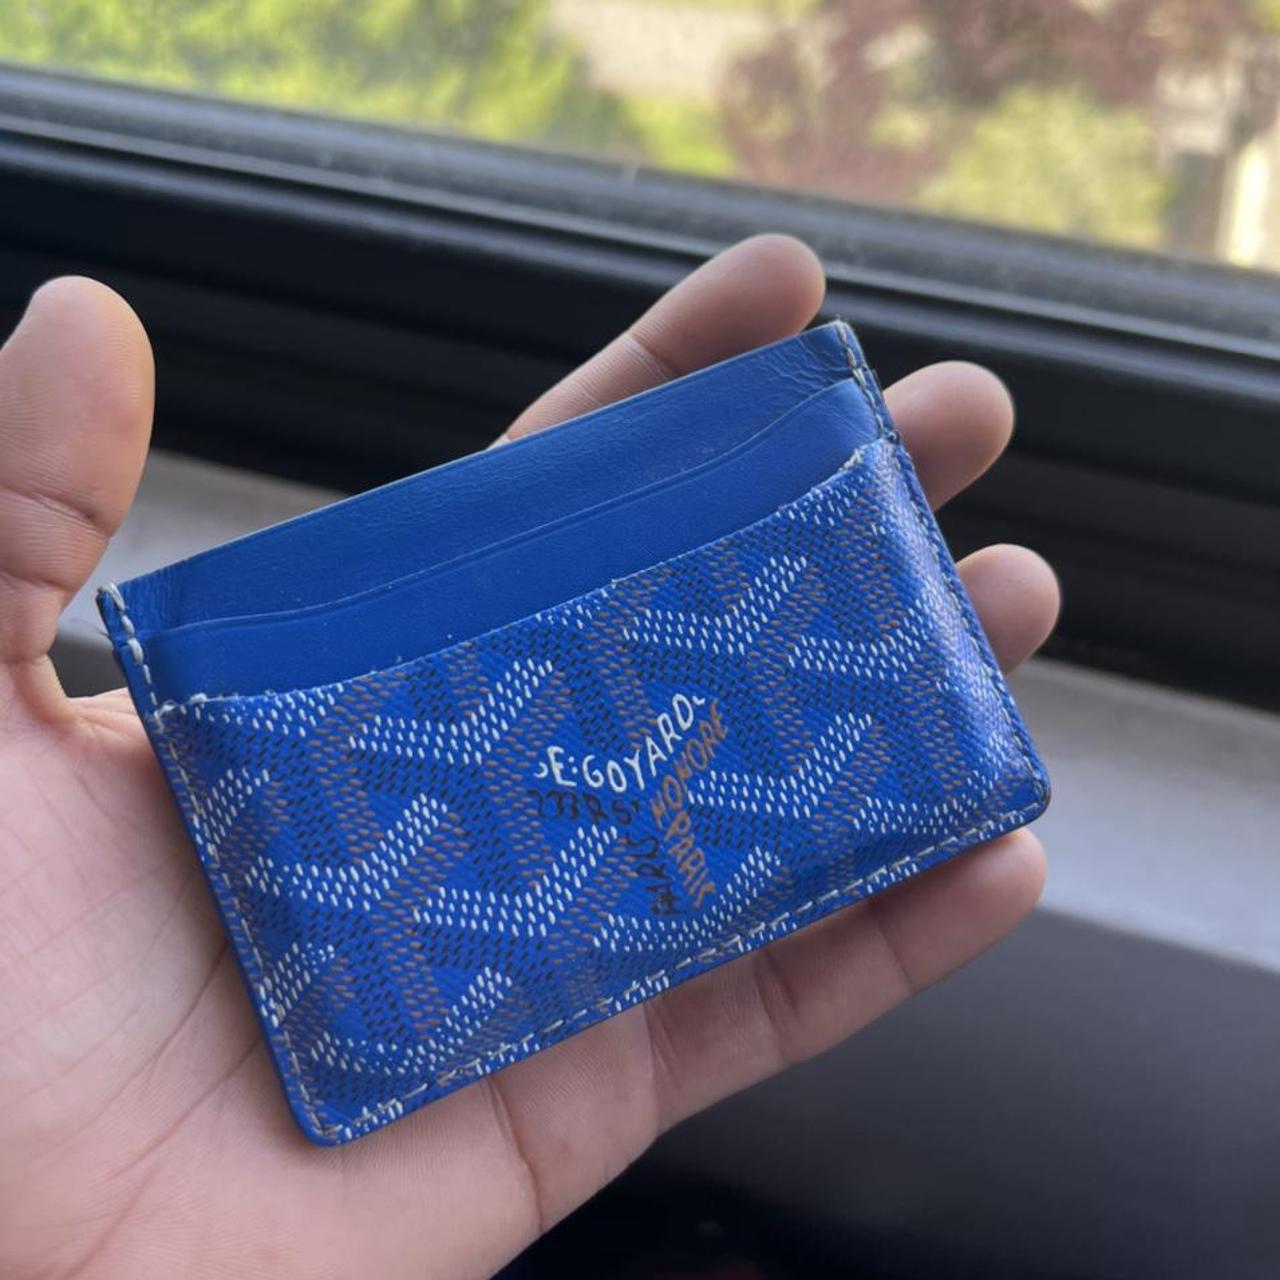 Goyard Blue St. Suplice , Comes with Box , Purchased